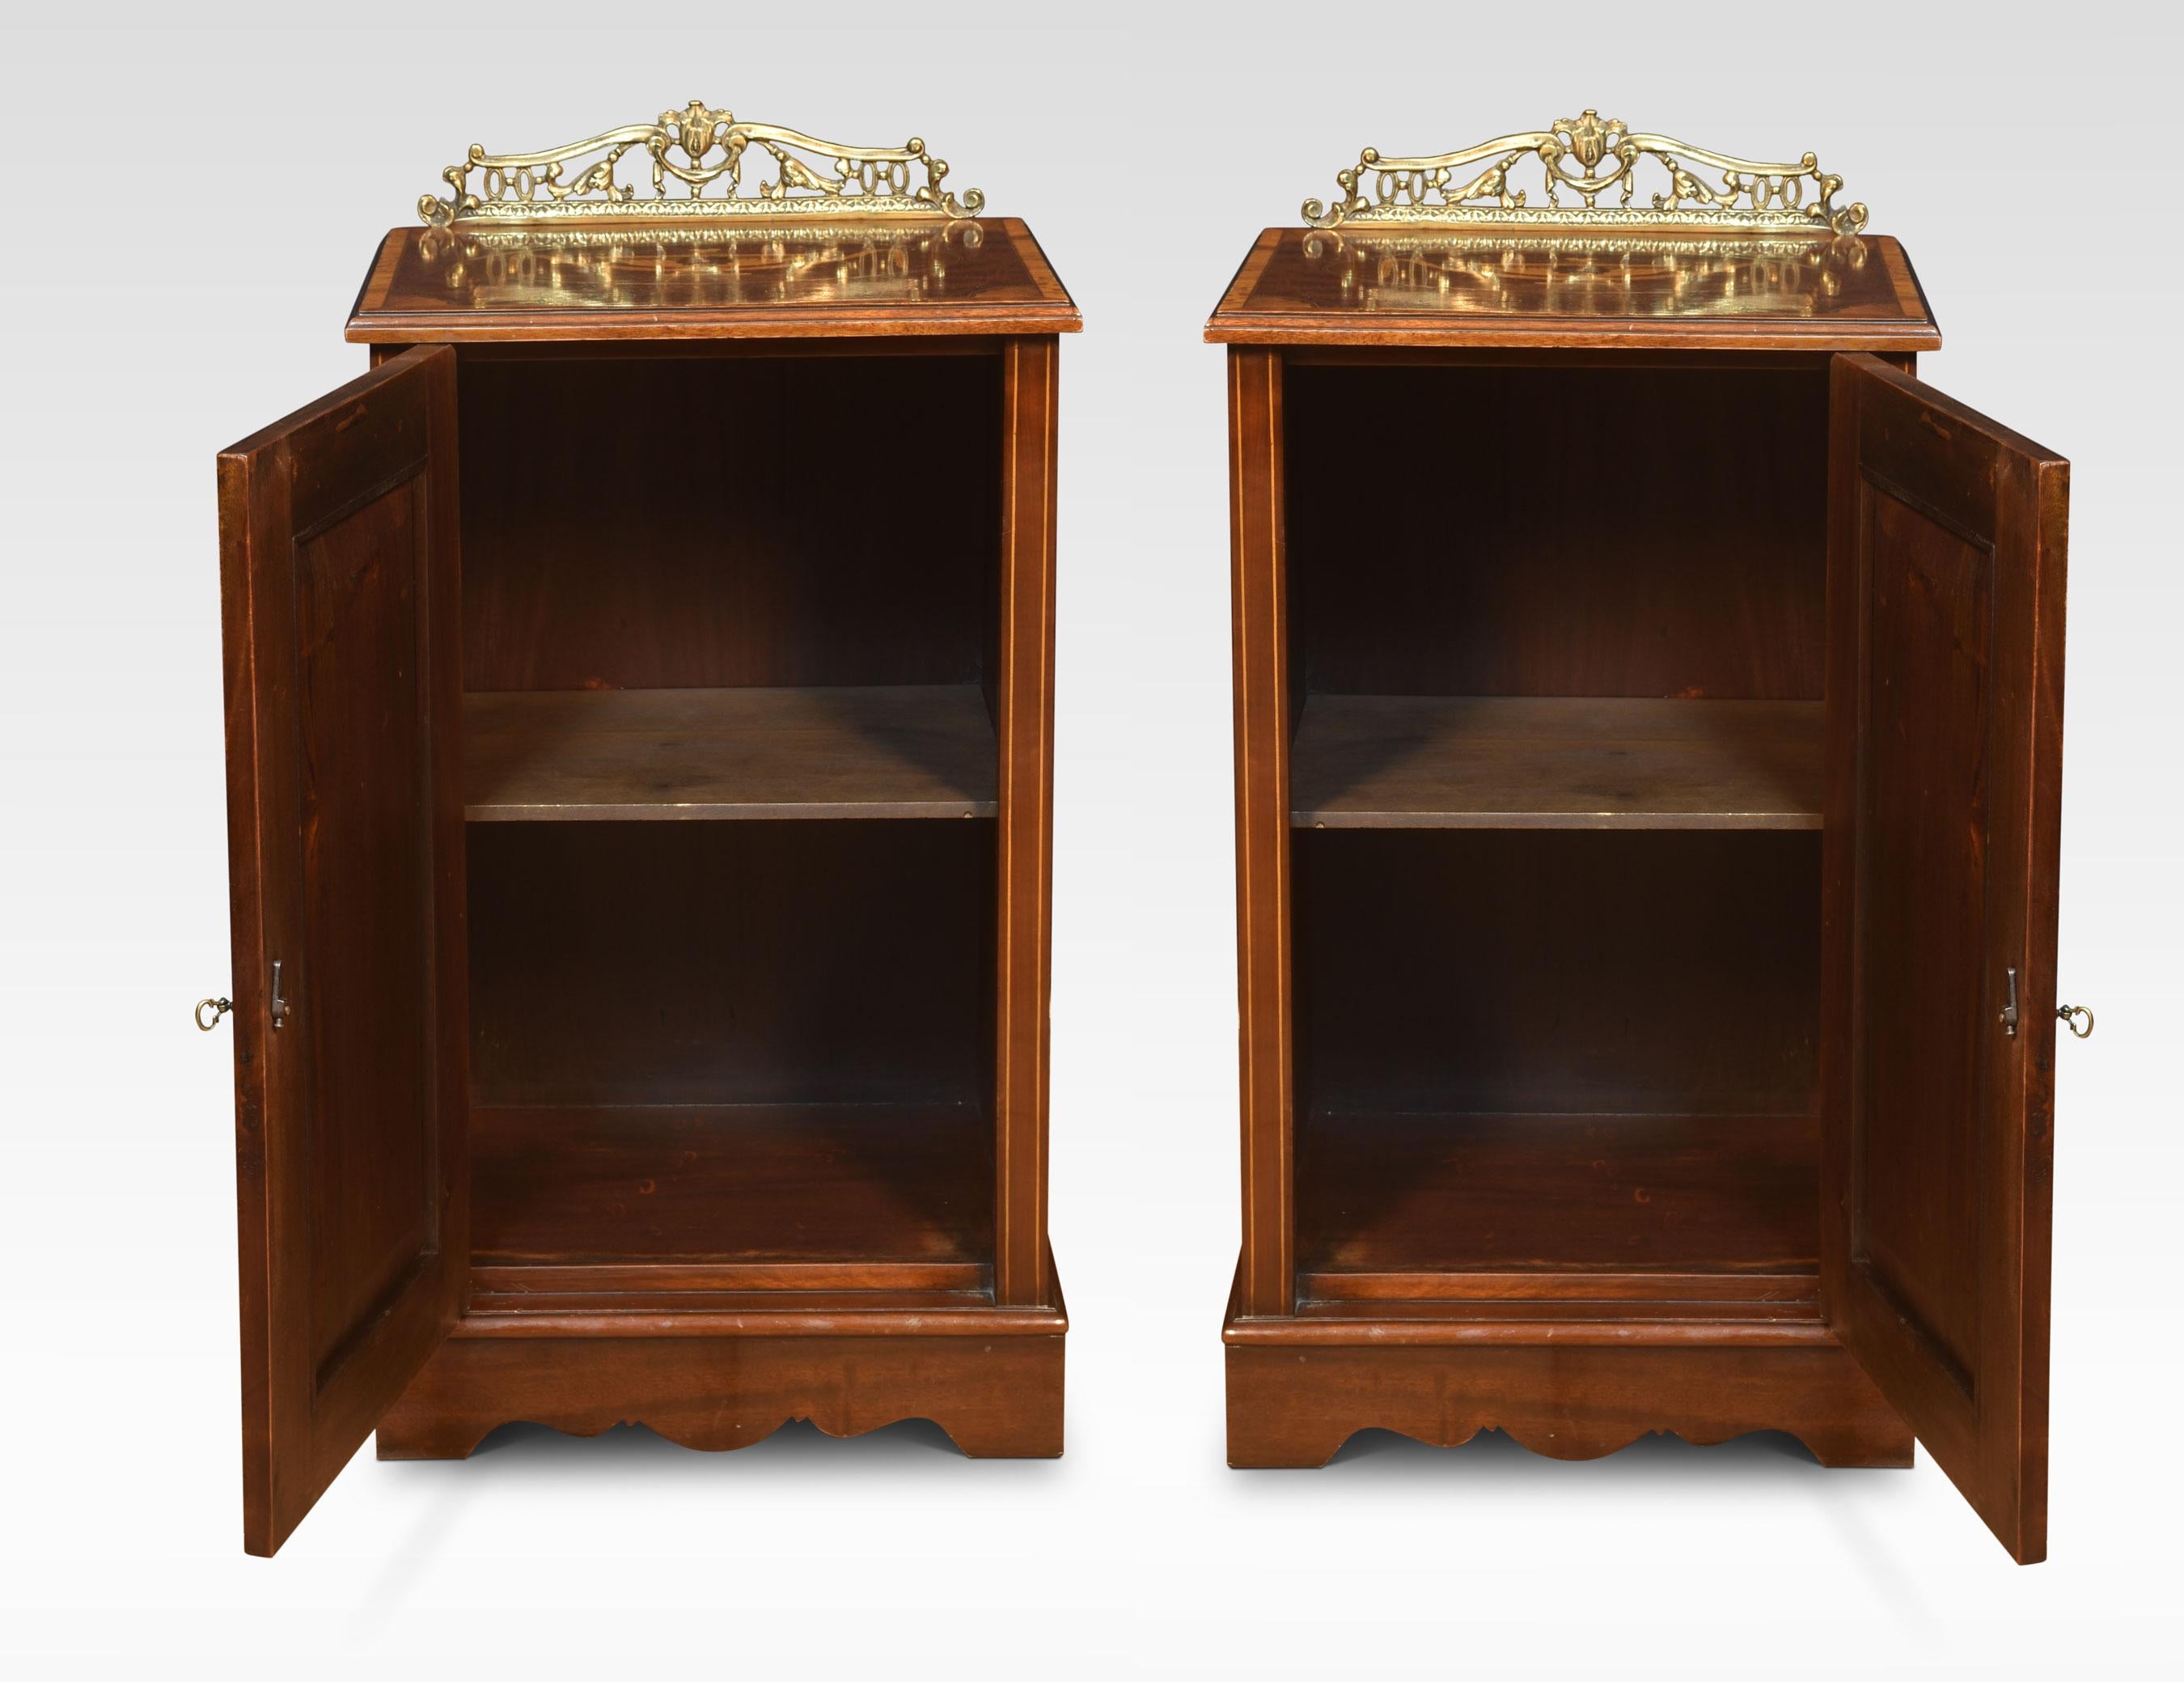 Pair of bedside cabinets, each having raised brass pierced gallery, above inlaid crossbanded tops. To the large panelled doors with marquetry panels having scrolling floral and Urn decoration. The door opens to reveal a large storage area and a